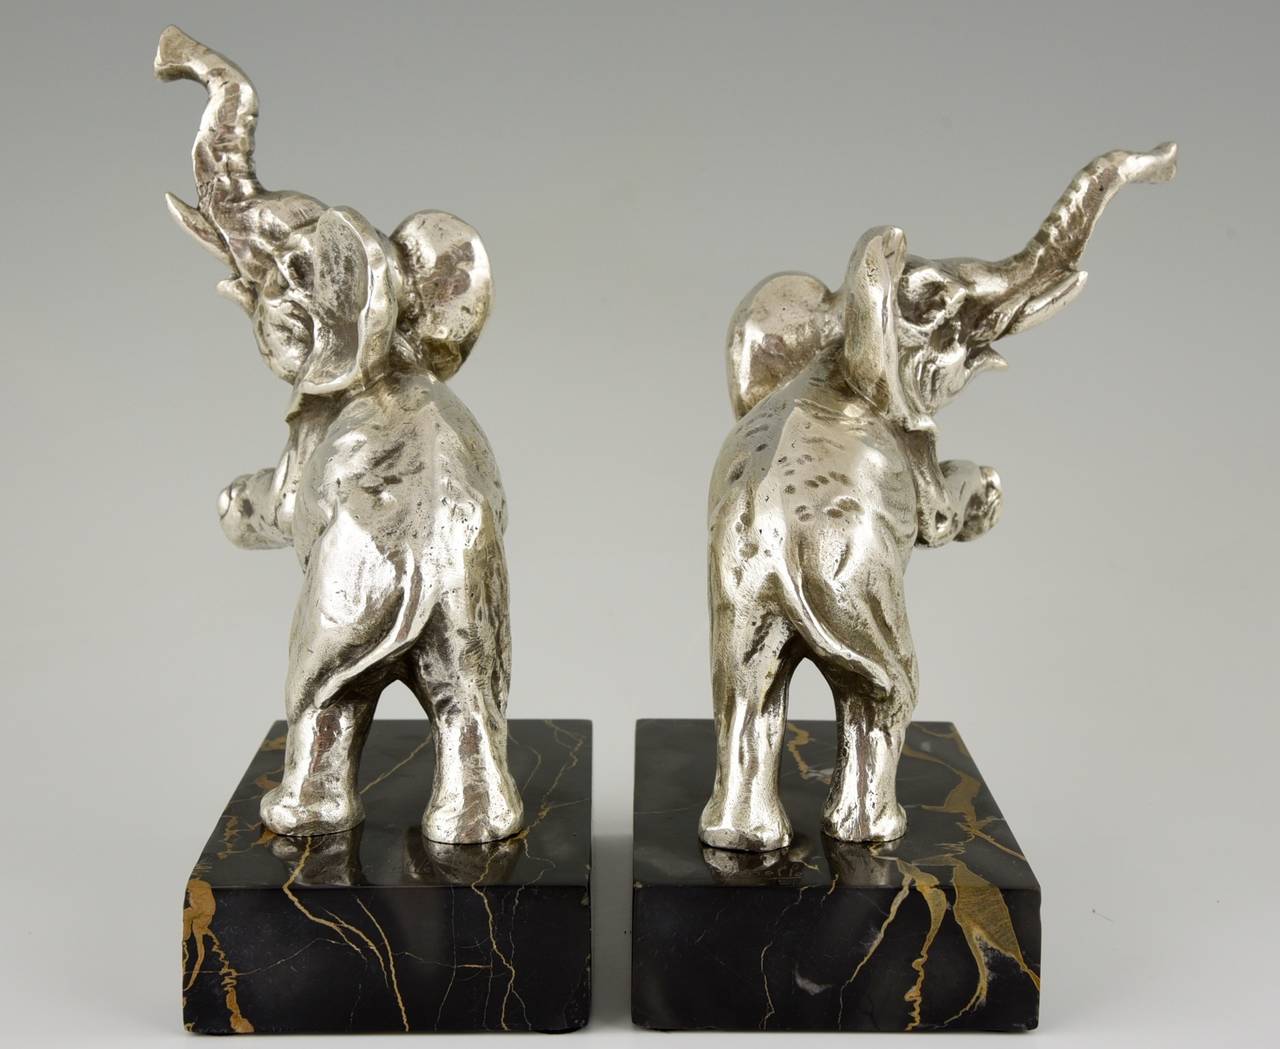 20th Century Art Deco silvered Bronze Elephant Bookends by Fontinelle 1930 France